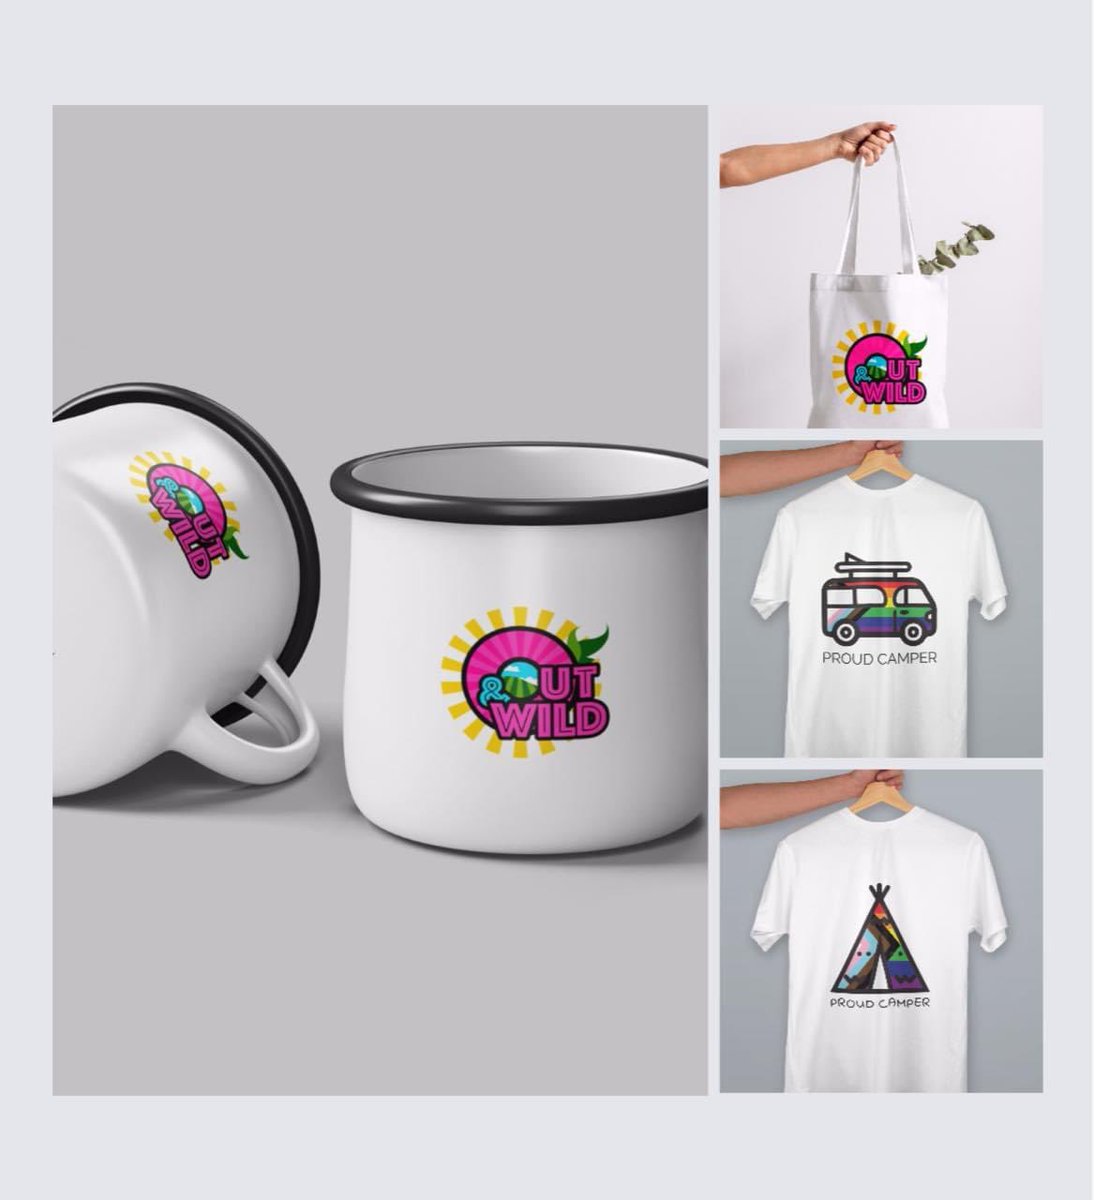 We may not be @target or @Budweiser but @OutandWildlgbtq merch will always be front of shop #pridemerch #PrideMonth #lgbtq #lgbtqsupport outandwild.co.uk/shop/